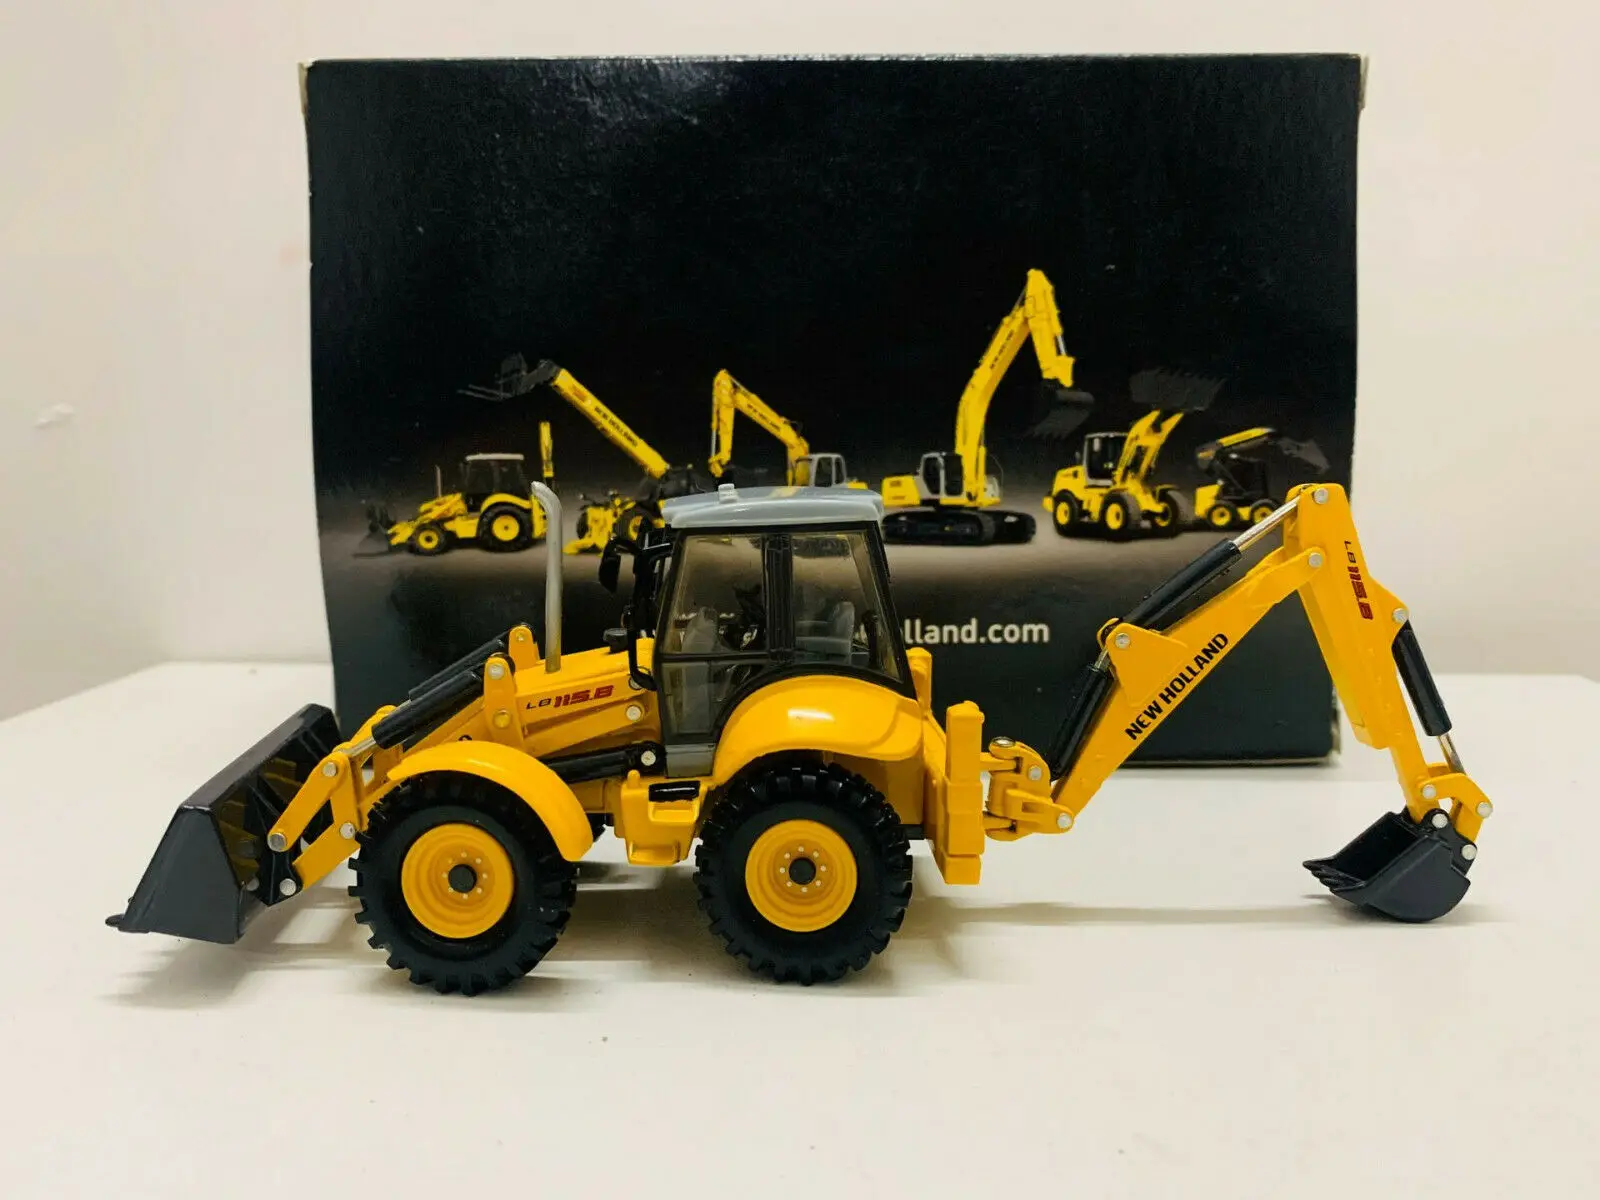 Ros New Holland LB 115B Backhoe Loader 1:50 Scale DieCast Model New in Box